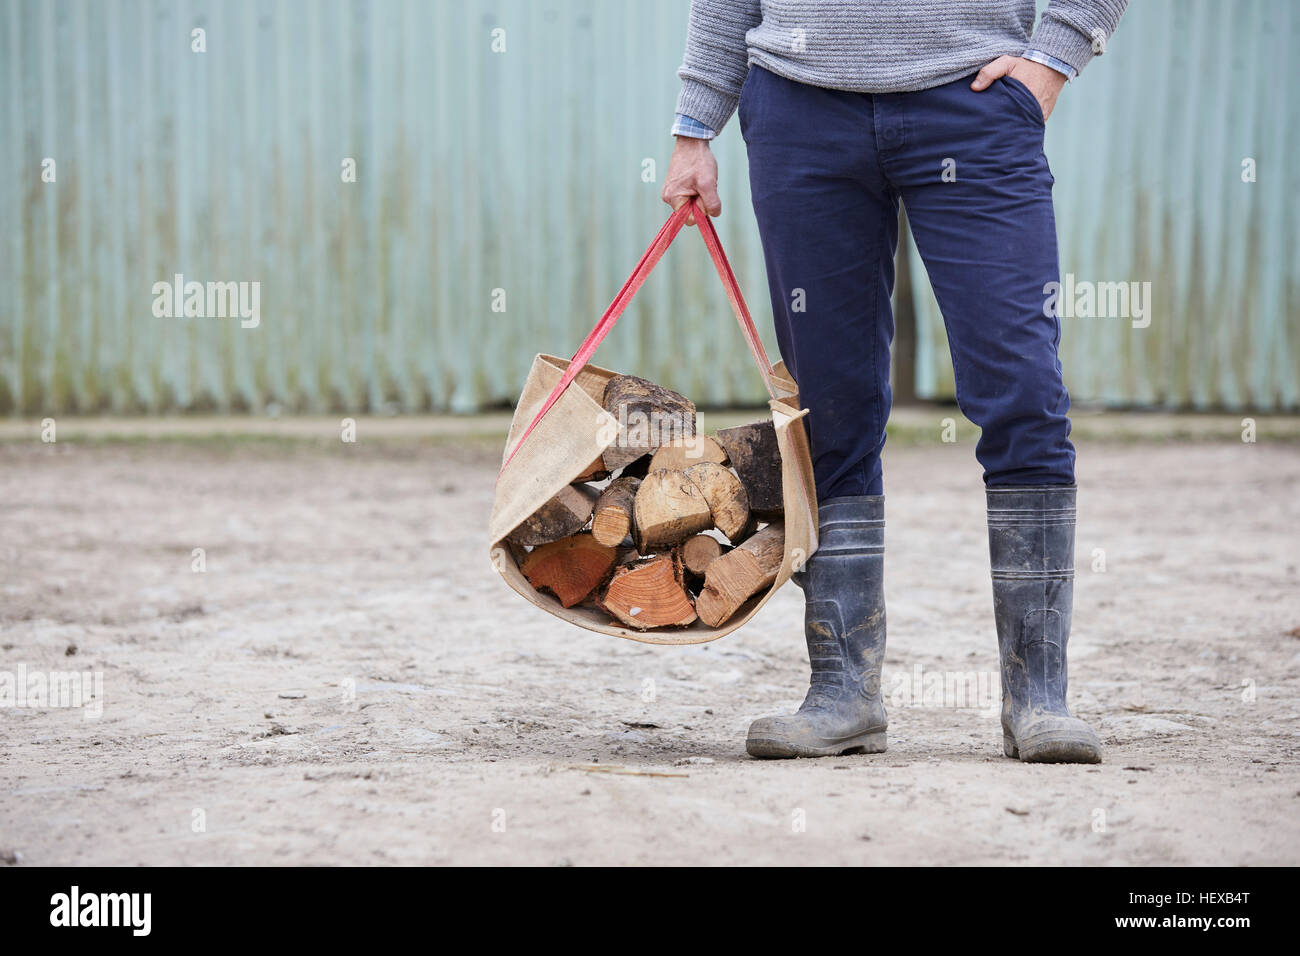 Waist down of man holding logs in log carrier Stock Photo